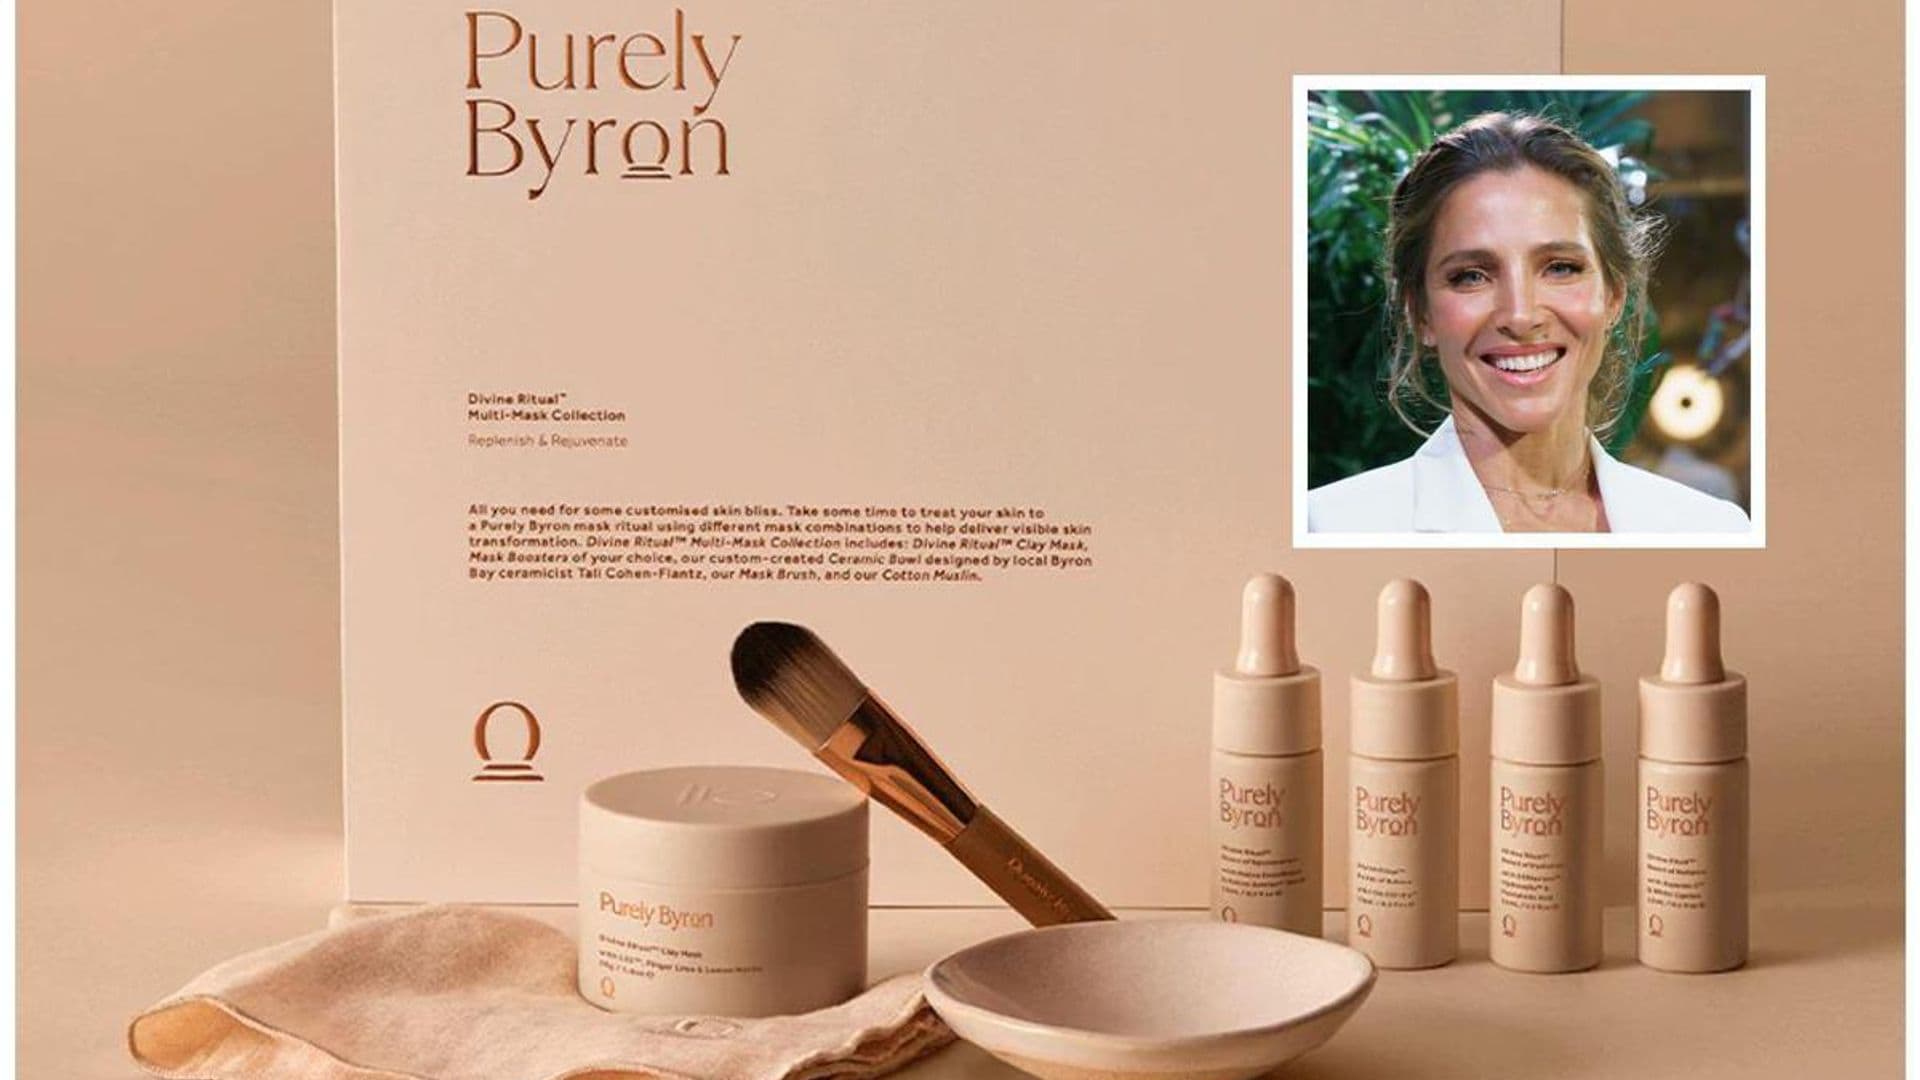 Elsa Pataky introduces Purely Byron, her new skincare line inspired by Australia’s beachside town